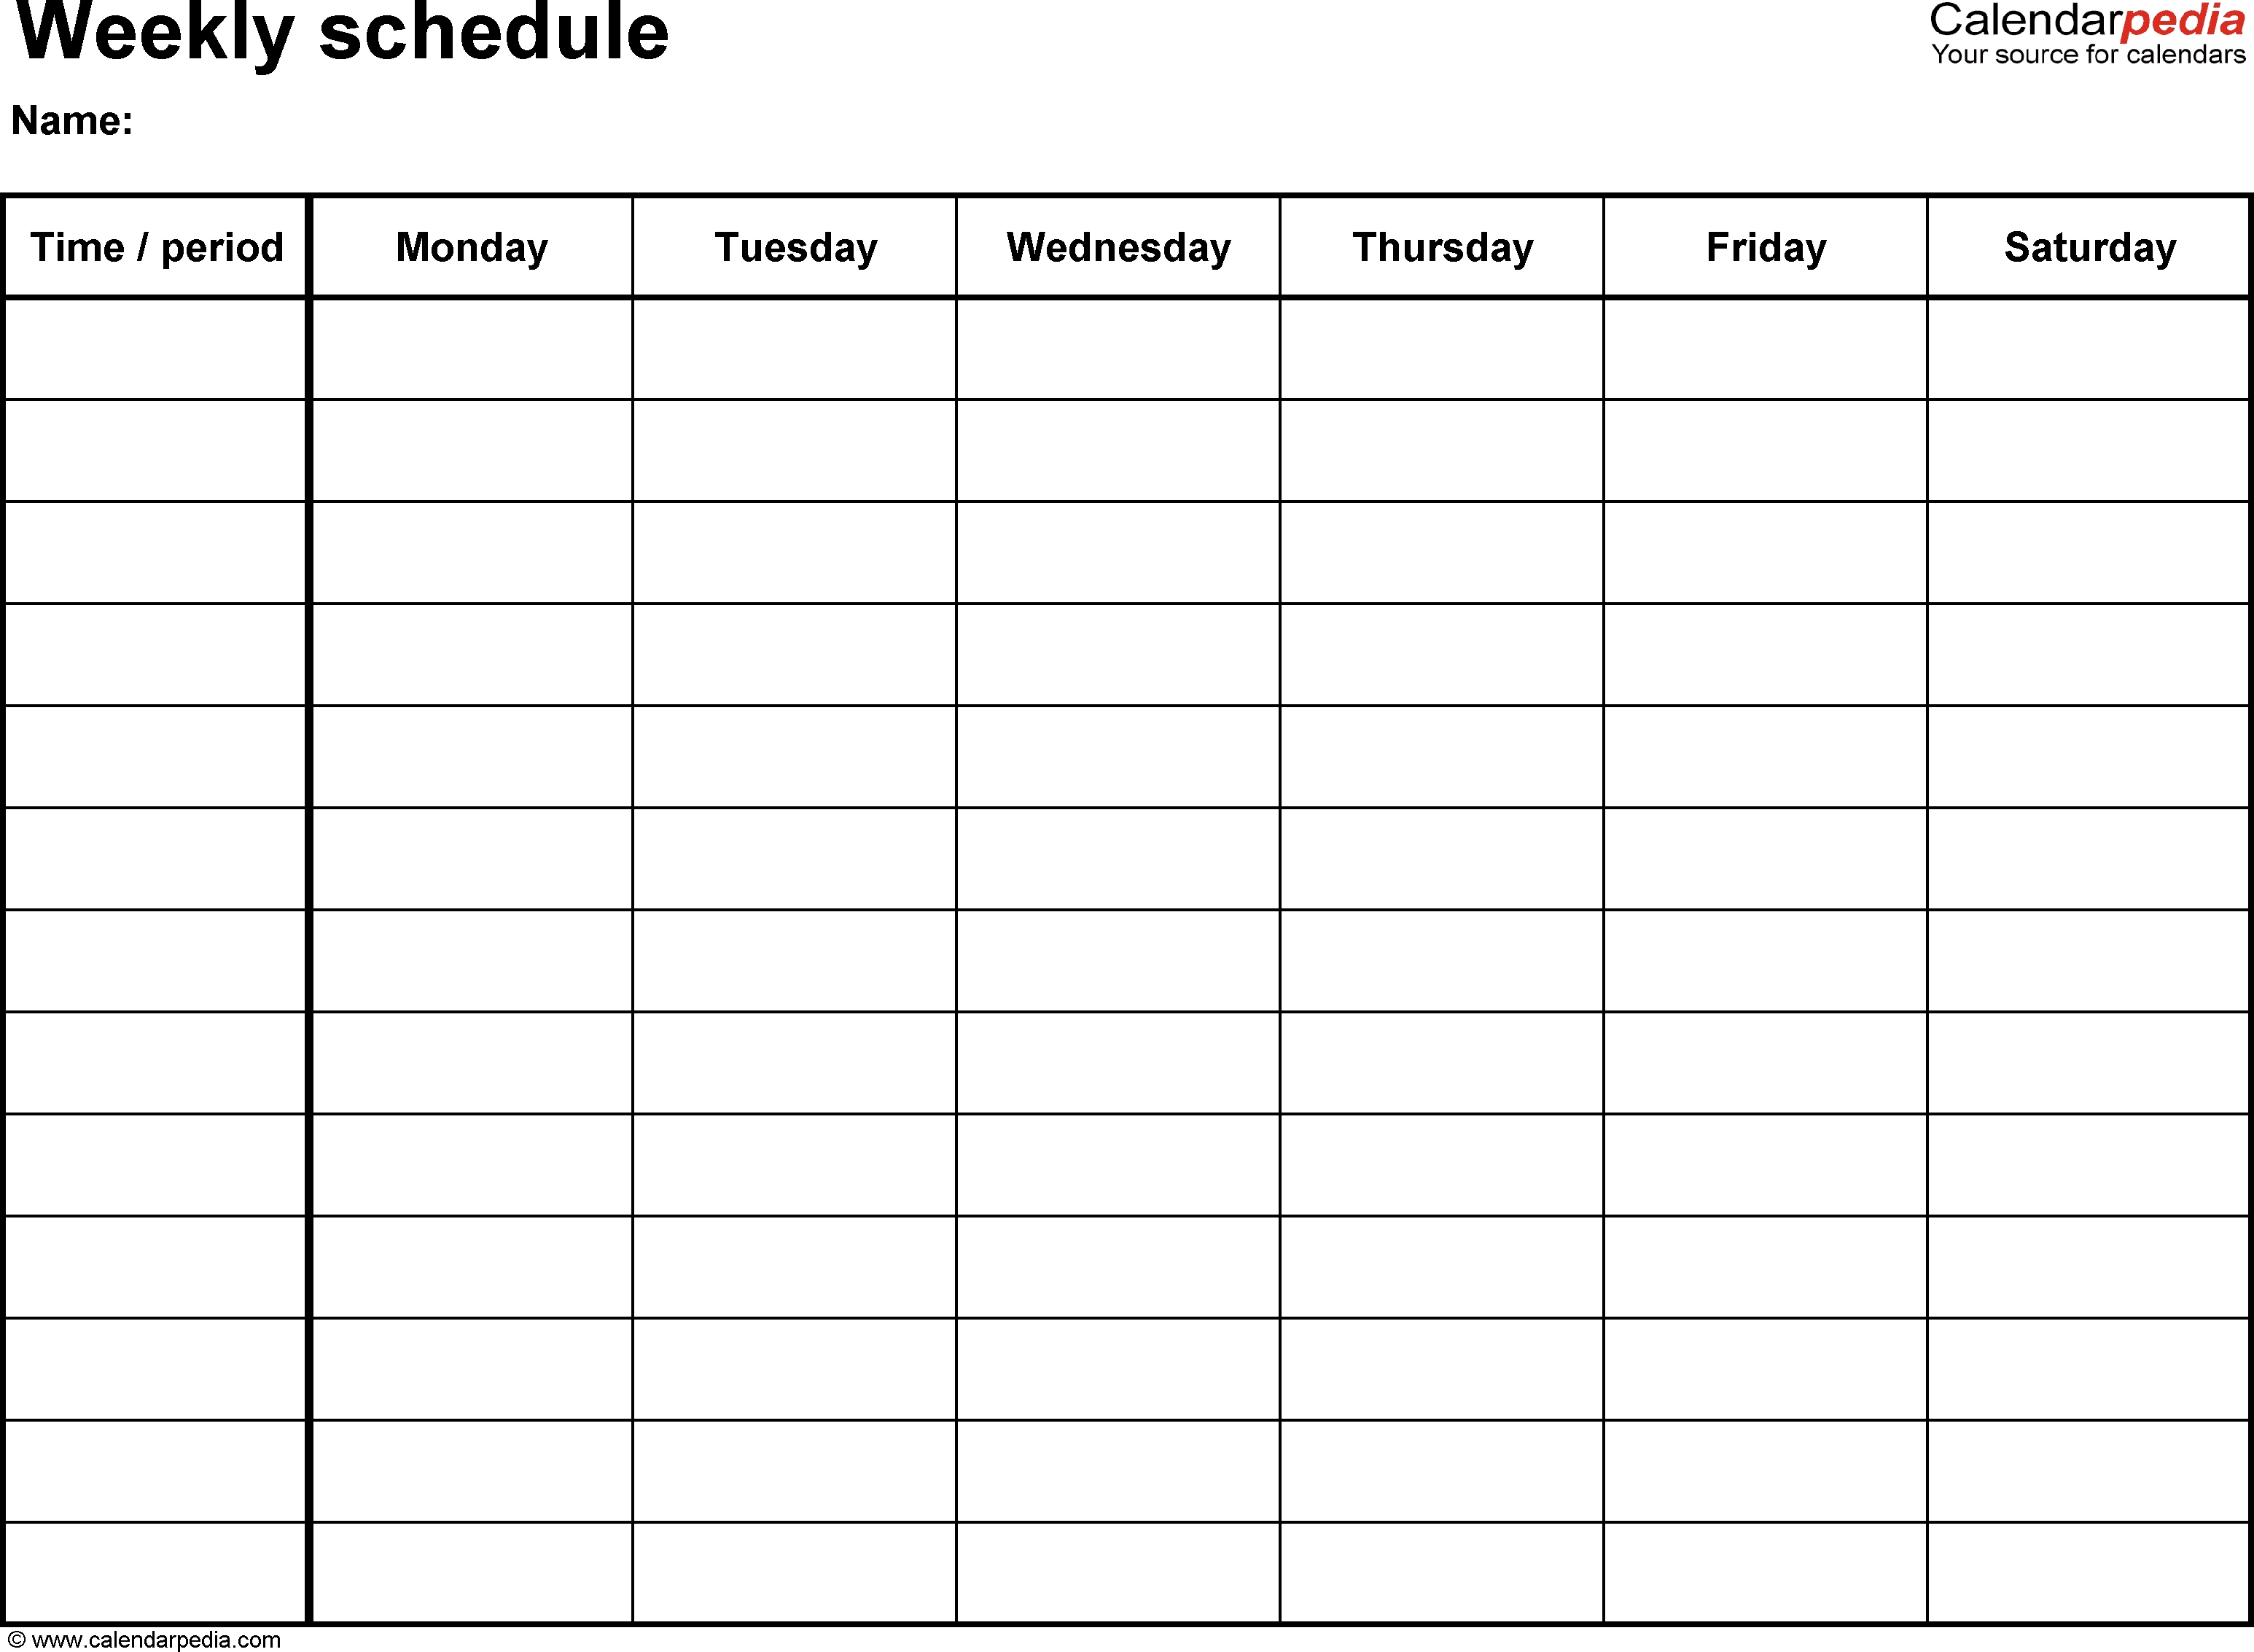 Free Weekly Schedule Templates For Pdf - 18 Templates in Free Printable Weekly Calendar Templates